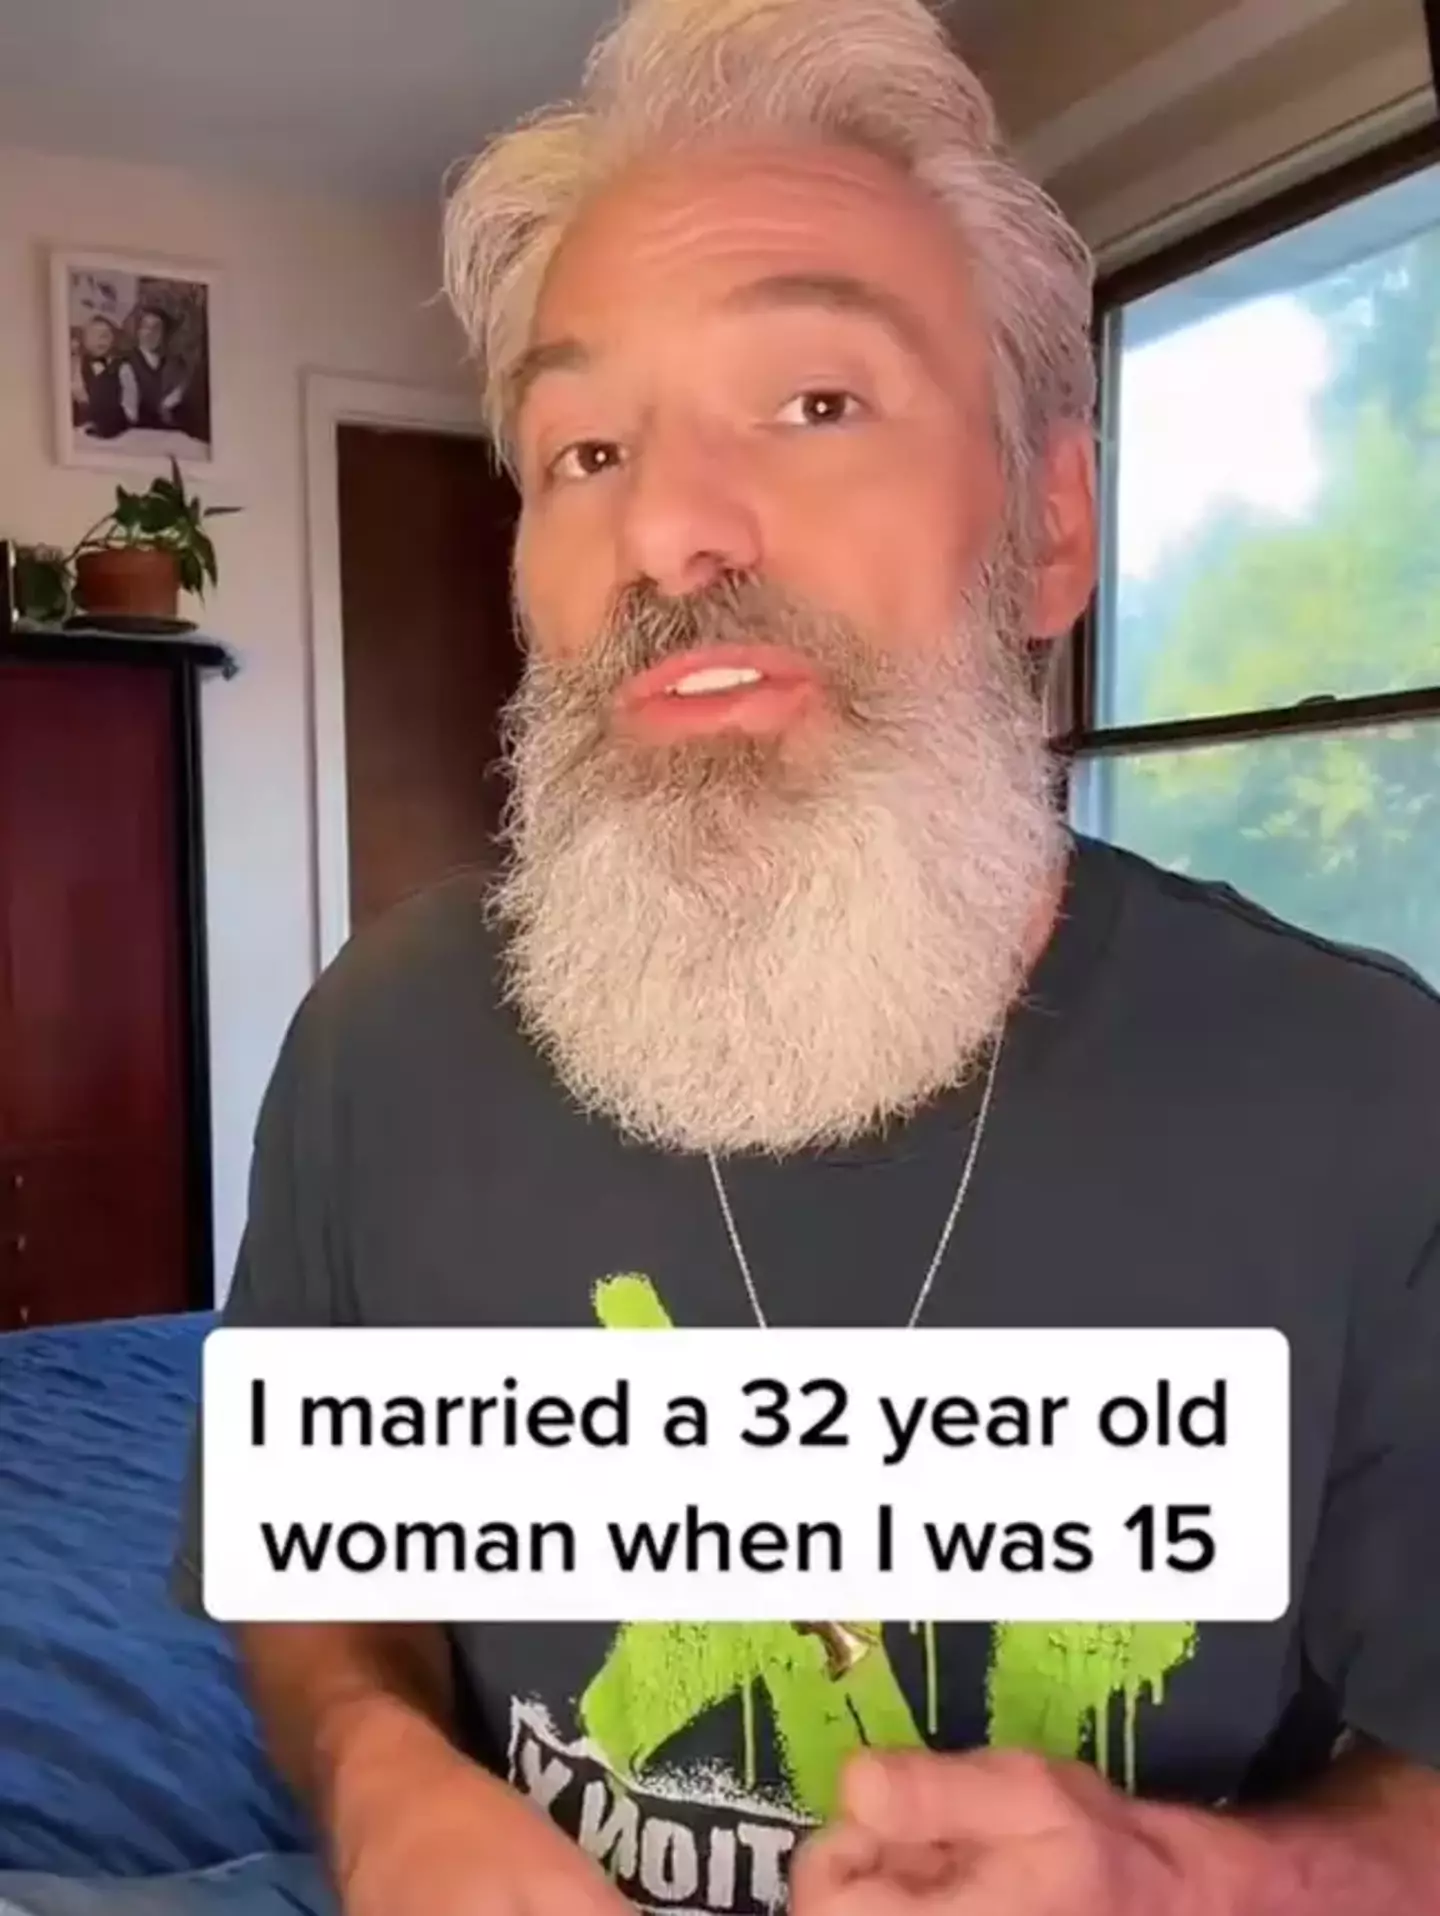 Chazonator shared how he married a 32-year-old when he was 15.